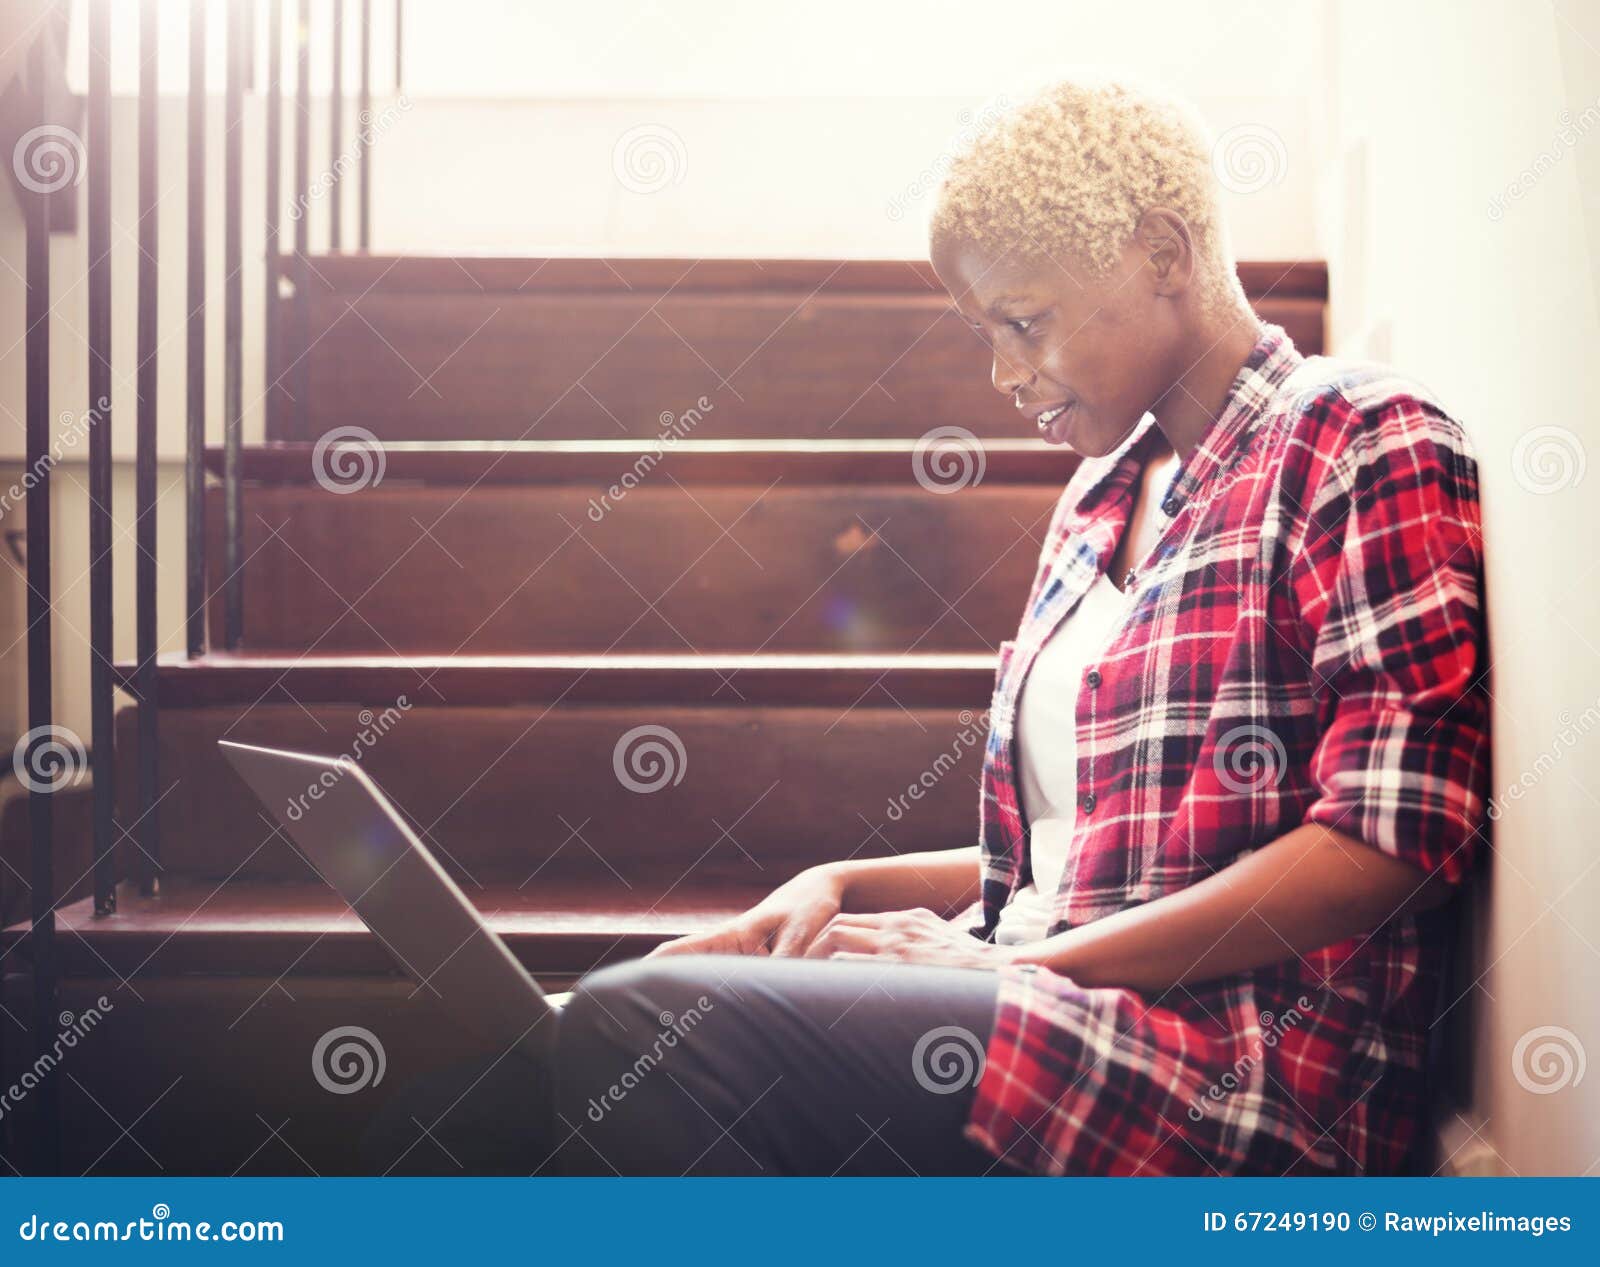 african woman searching internet sitting on steps